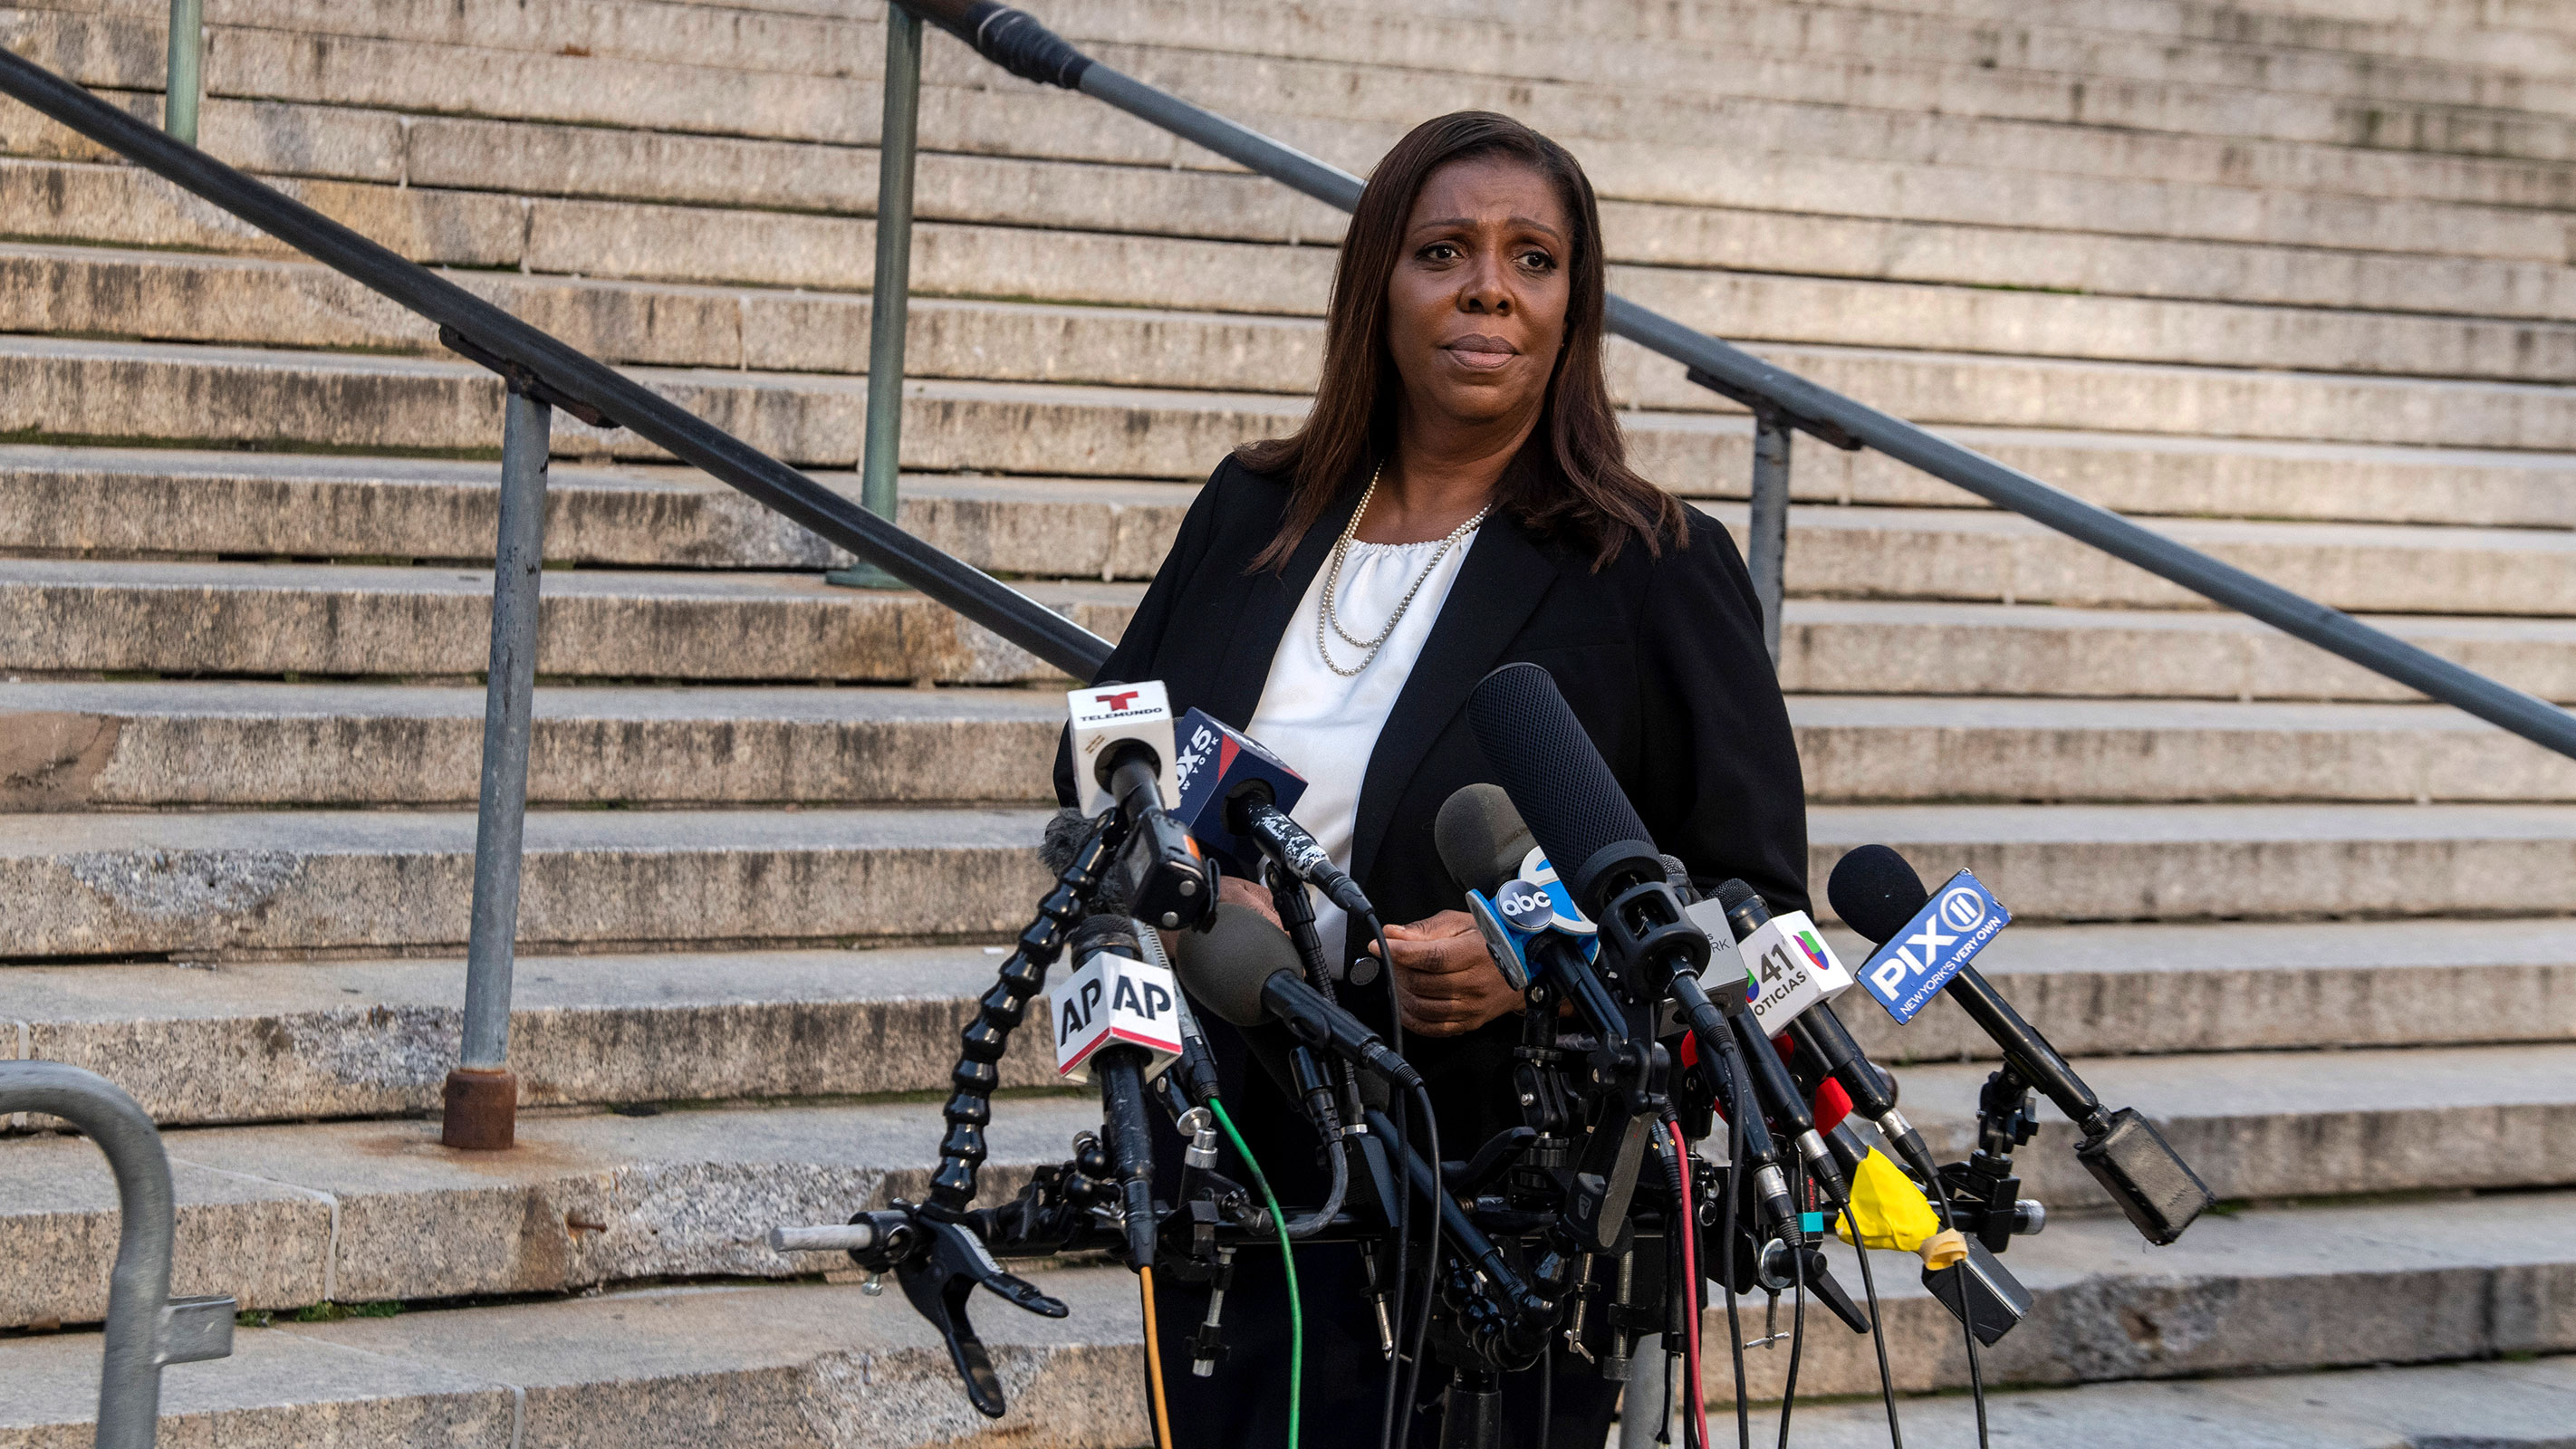 New York Attorney General Letitia James arrives outside New York Supreme Court ahead of former President Donald Trump's civil business fraud trial on Monday in New York.